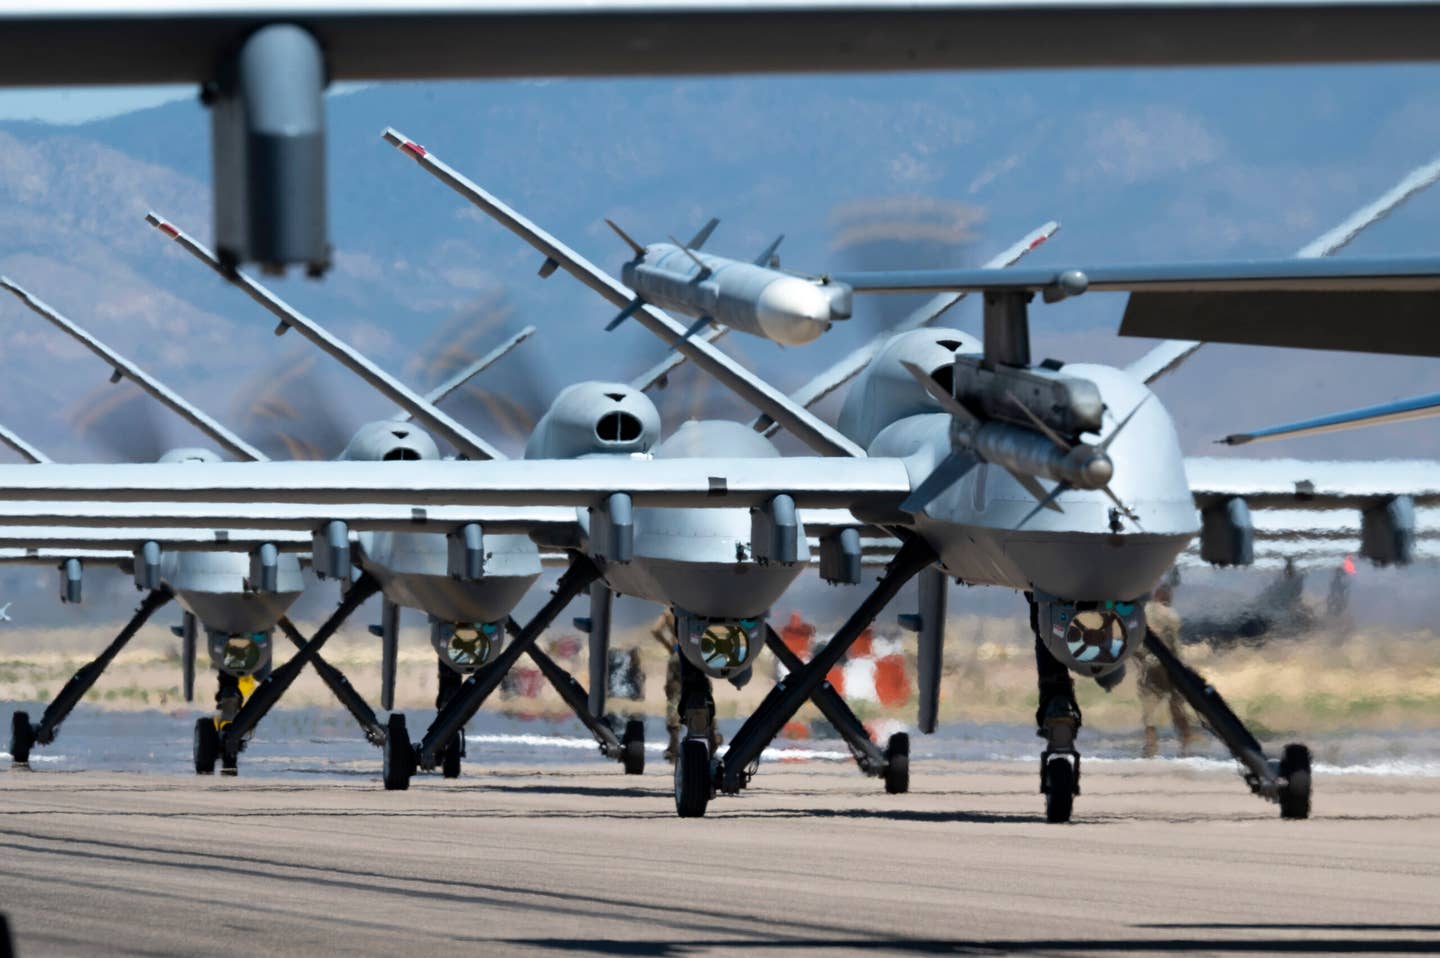 MQ-9s assigned to the 49th Wing line up on the runway during the elephant walk at Holloman Air Force Base. <em>U.S. Air Force photo by Tech. Sgt. Victor J. Caputo</em>